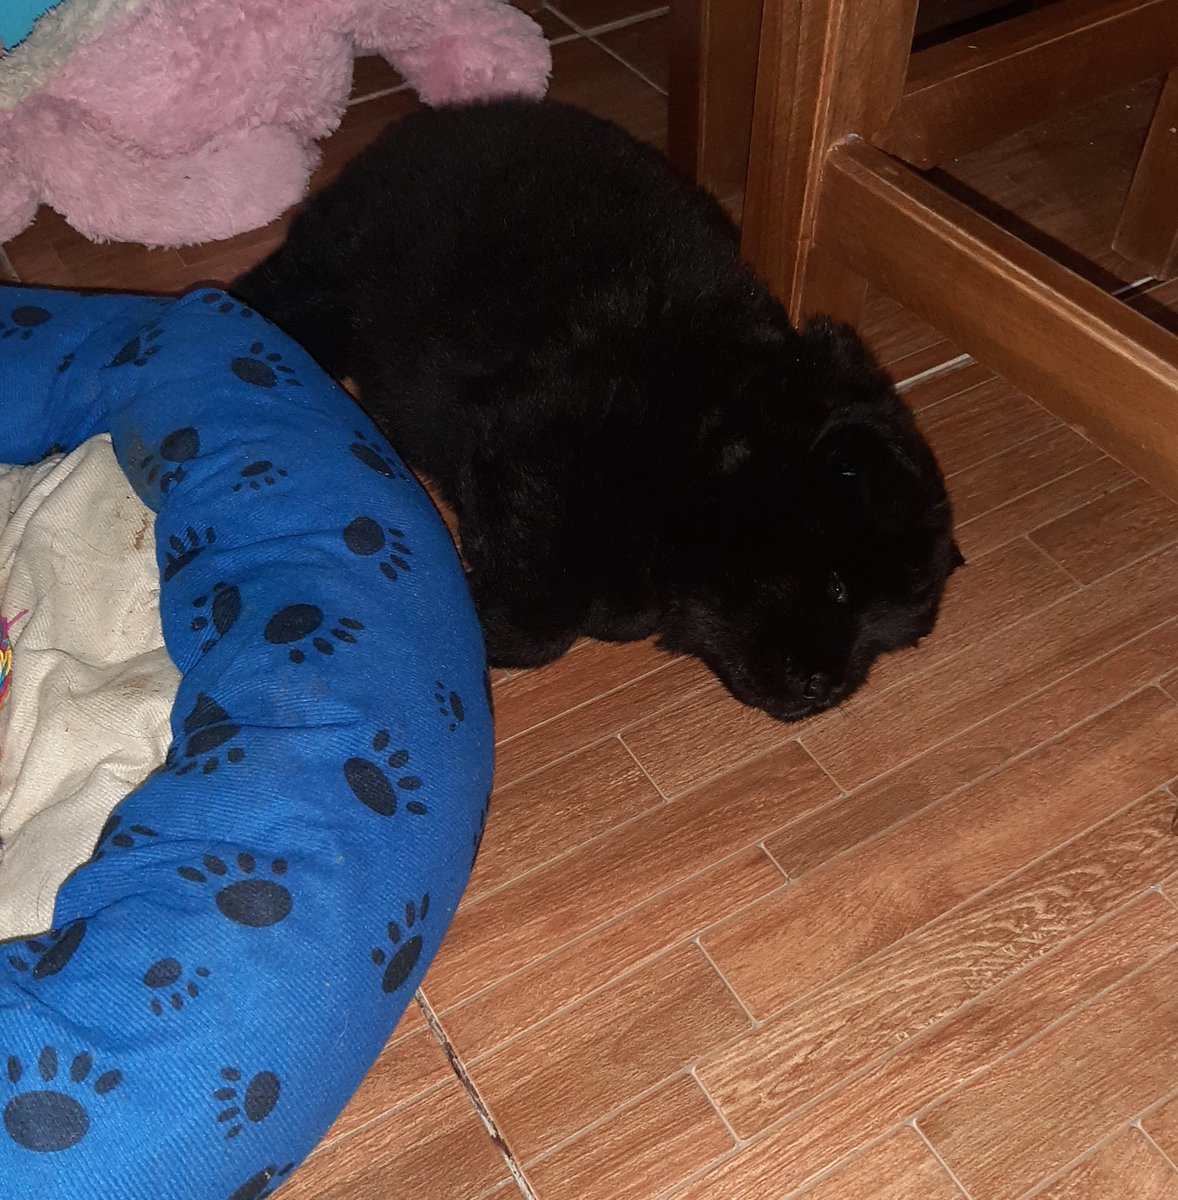 Also that was him a few weeks back he's actually bigger now. His vet was very proud of him.This is him tonight, going through the whole process of putting his plushie aside and empty his bed to once again Not sleep in it